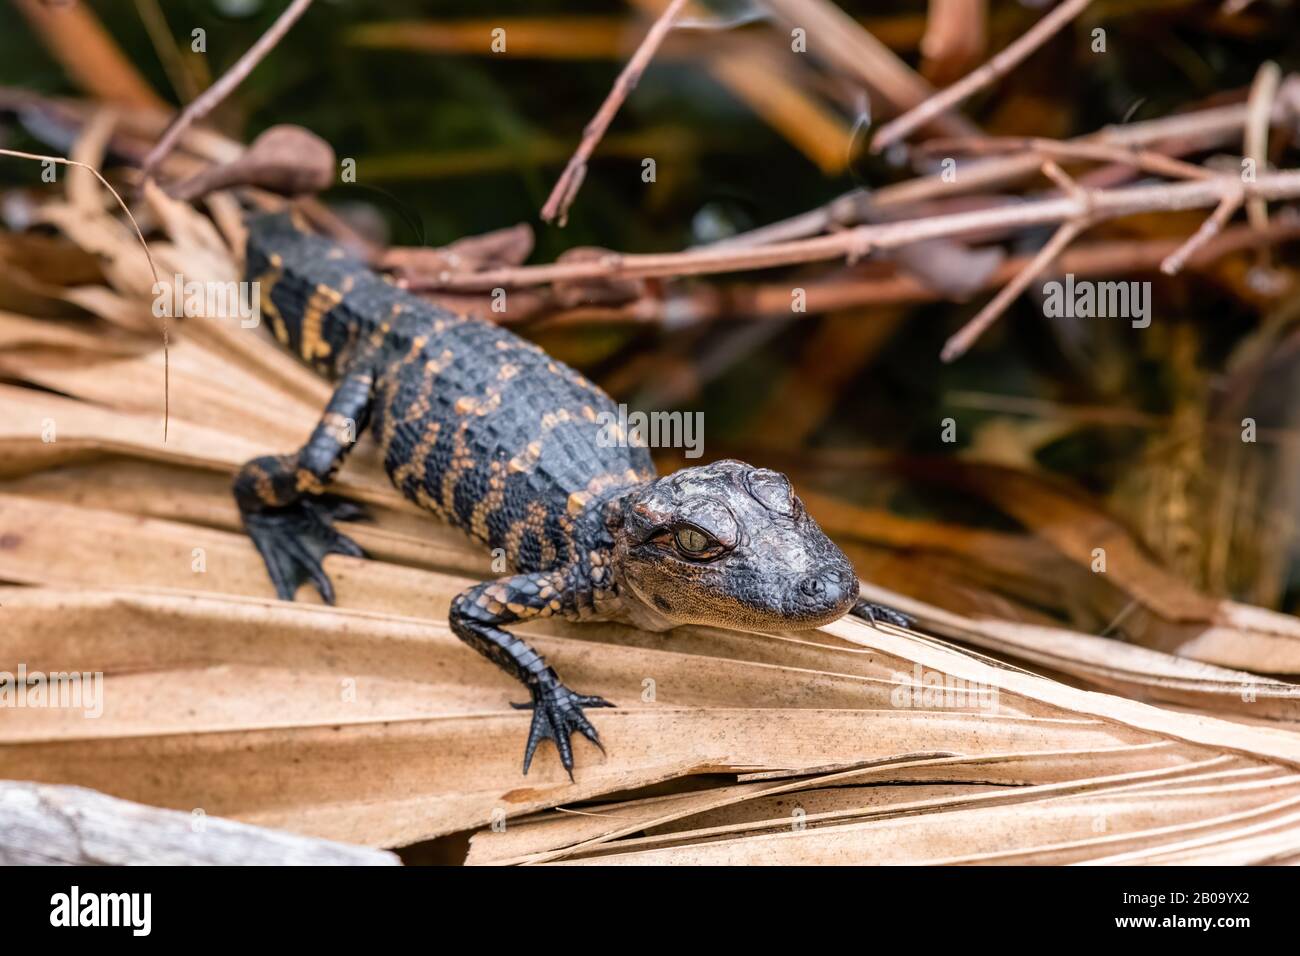 A young American alligator (Alligator mississippiensis) hatchling on a dried palm frond in the Merritt Island National Wildlife Refuge in Florida, USA Stock Photo